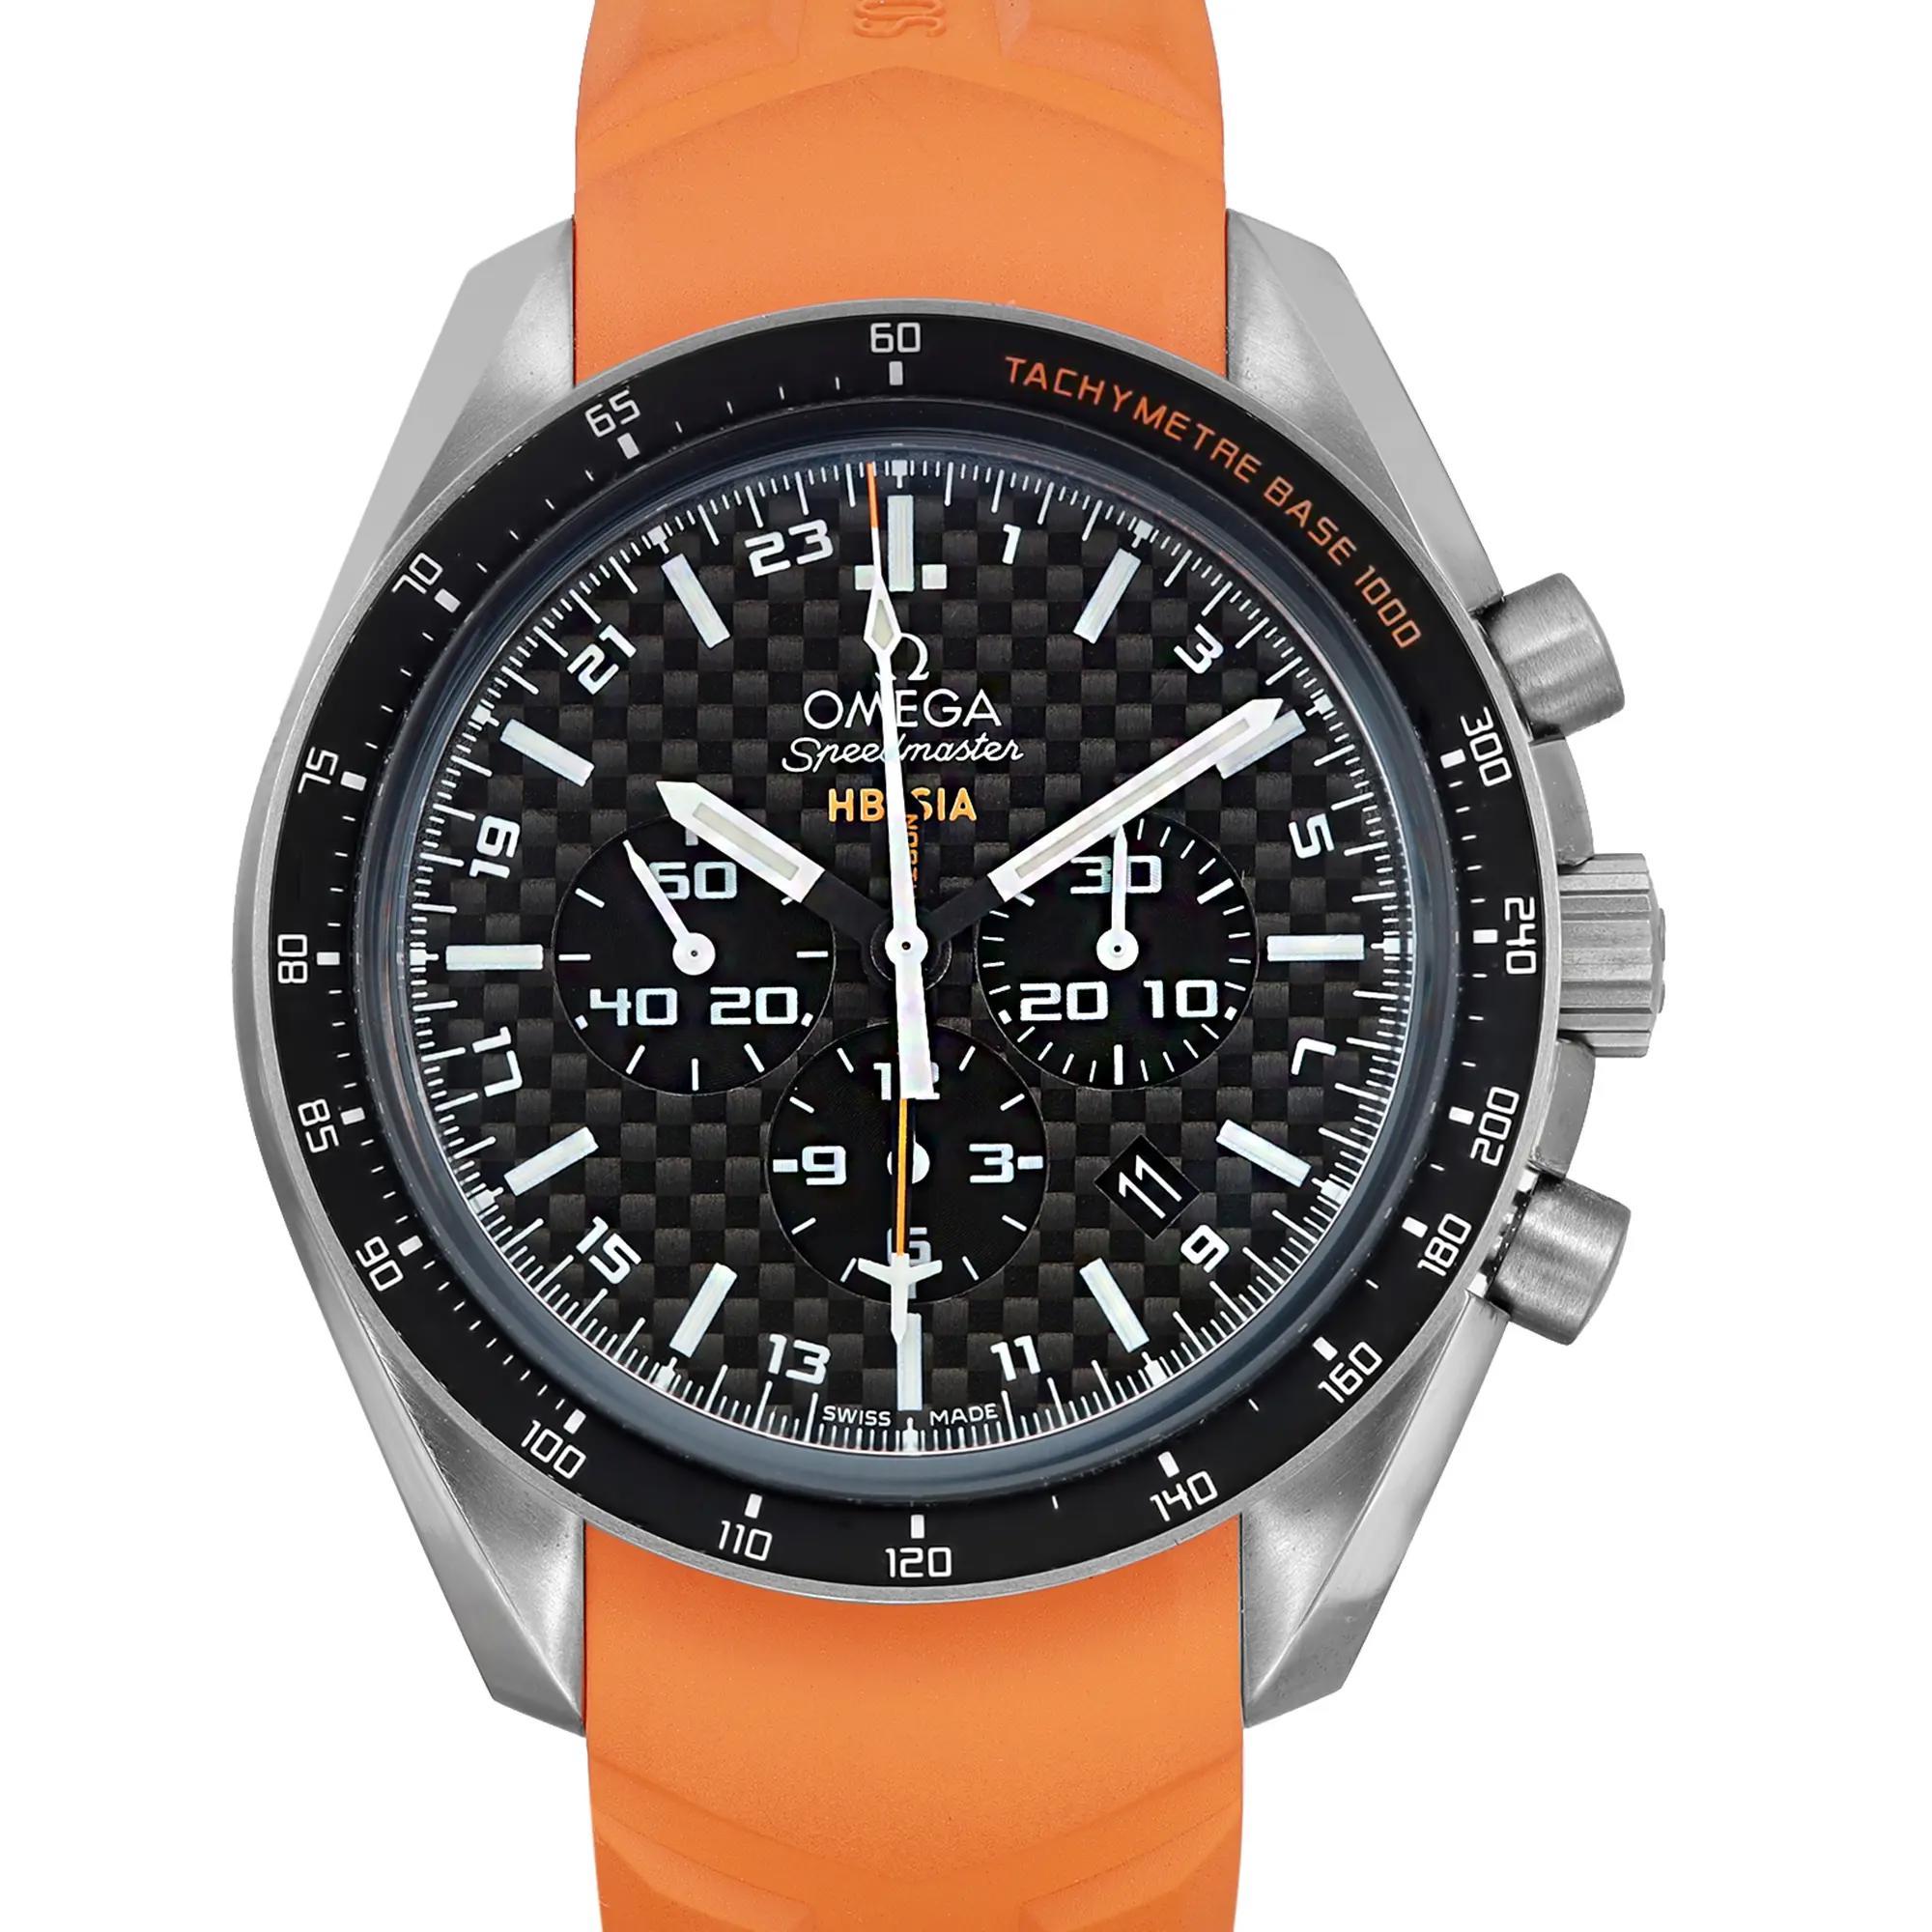 New With defects. Minor nicks on the bezel insert at 11 O'Clock During Store display. Orange GMT hand. 

* Free Shipping within the USA
* Two-year warranty coverage
* 14-day return policy with a full refund. Buyers can verify the watch's